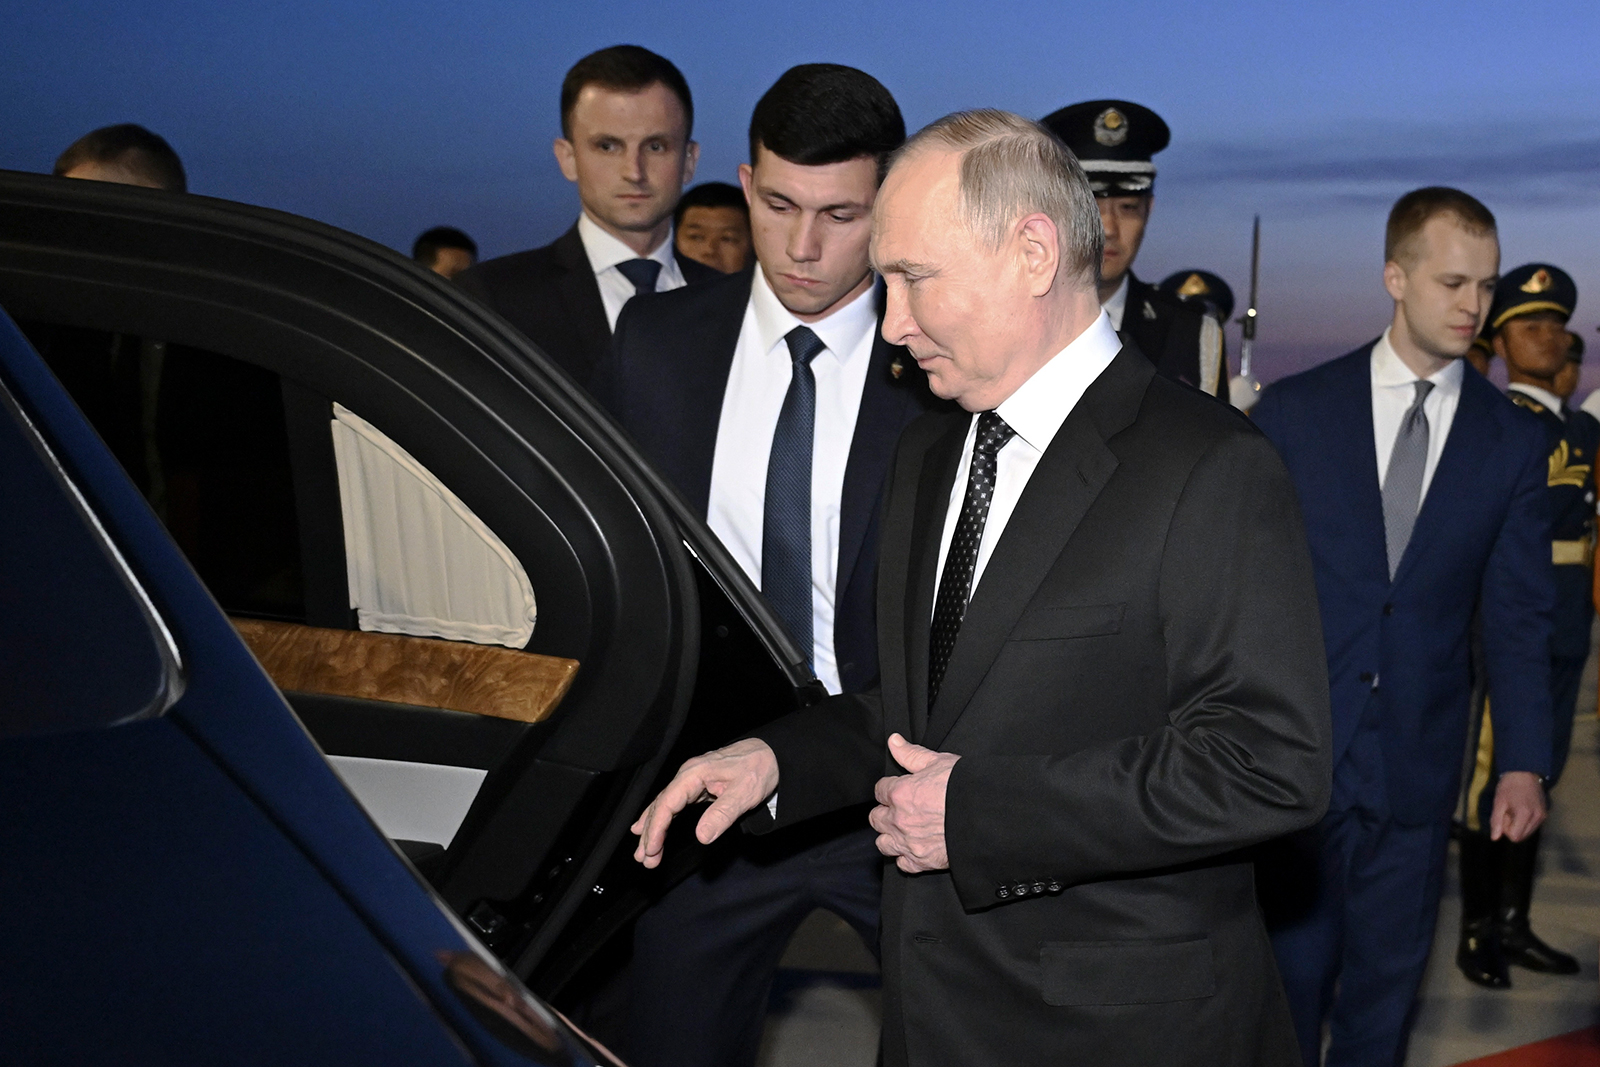 Russia's President Vladimir Putin gets into a vehicle upon arrival at the Beijing Capital International Airport on May 16.